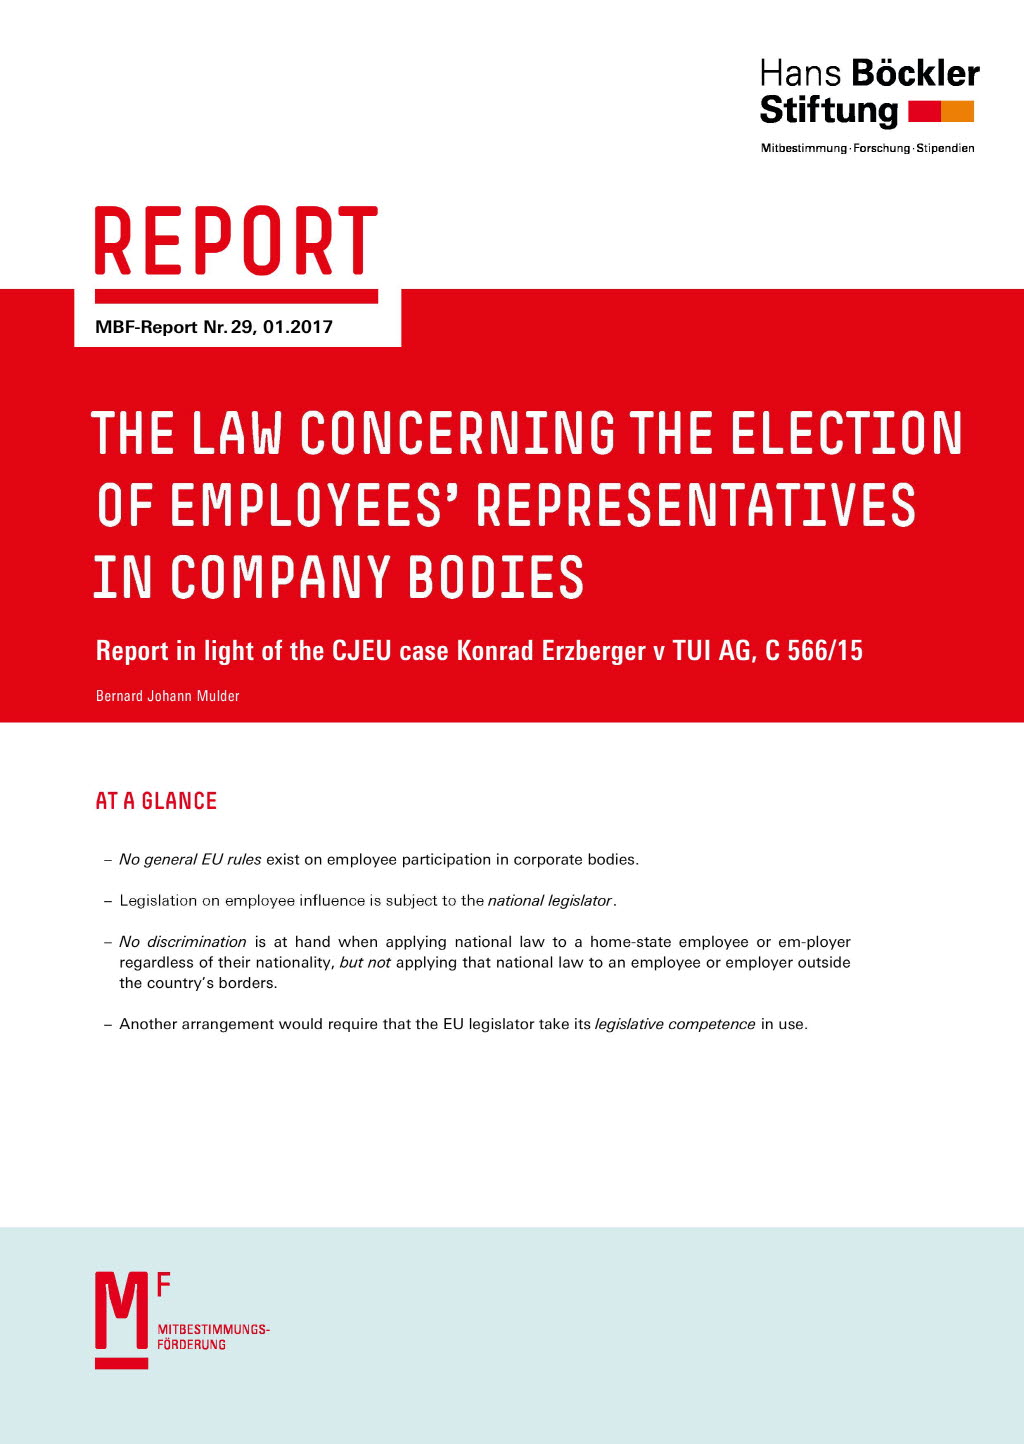 The law concerning the election of employees´representatives in company bodies